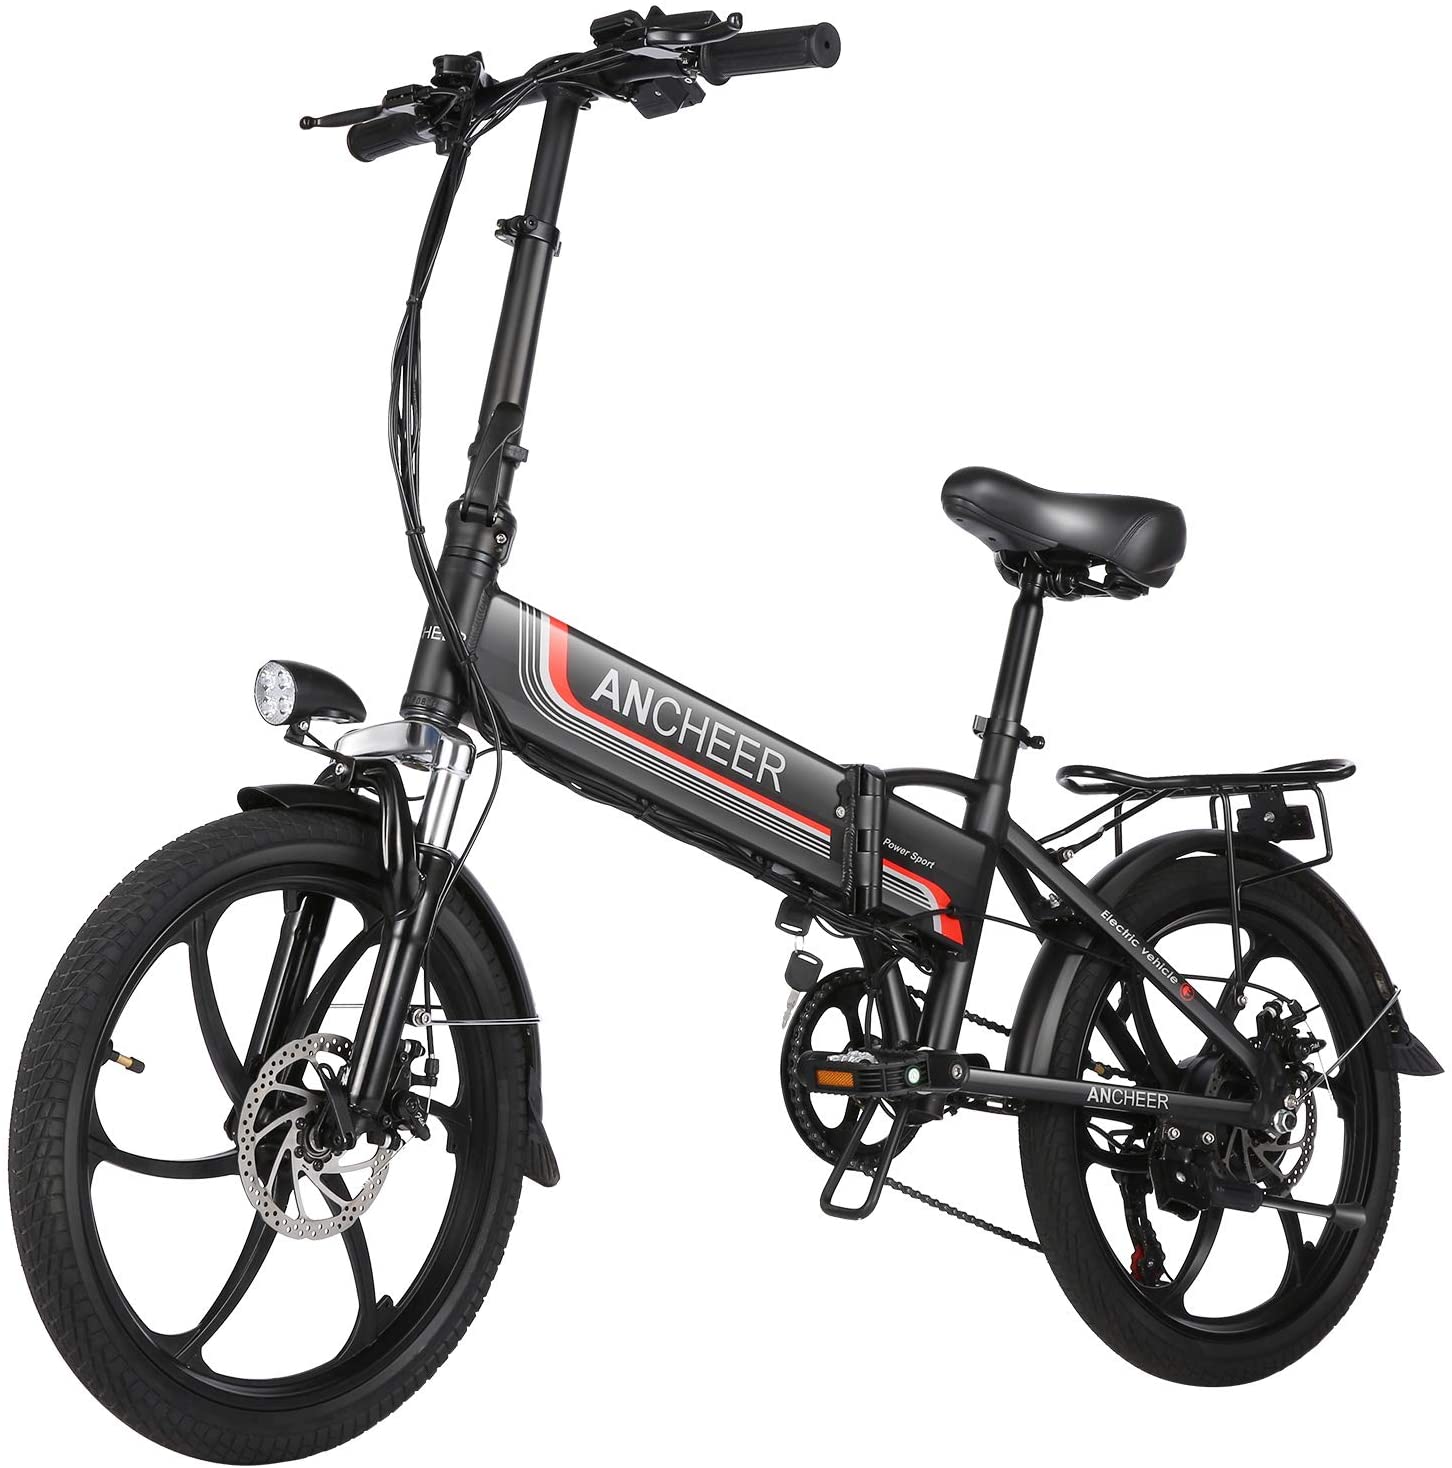 ANCHEER LCD Display Collapsible Bike, 7-Speed